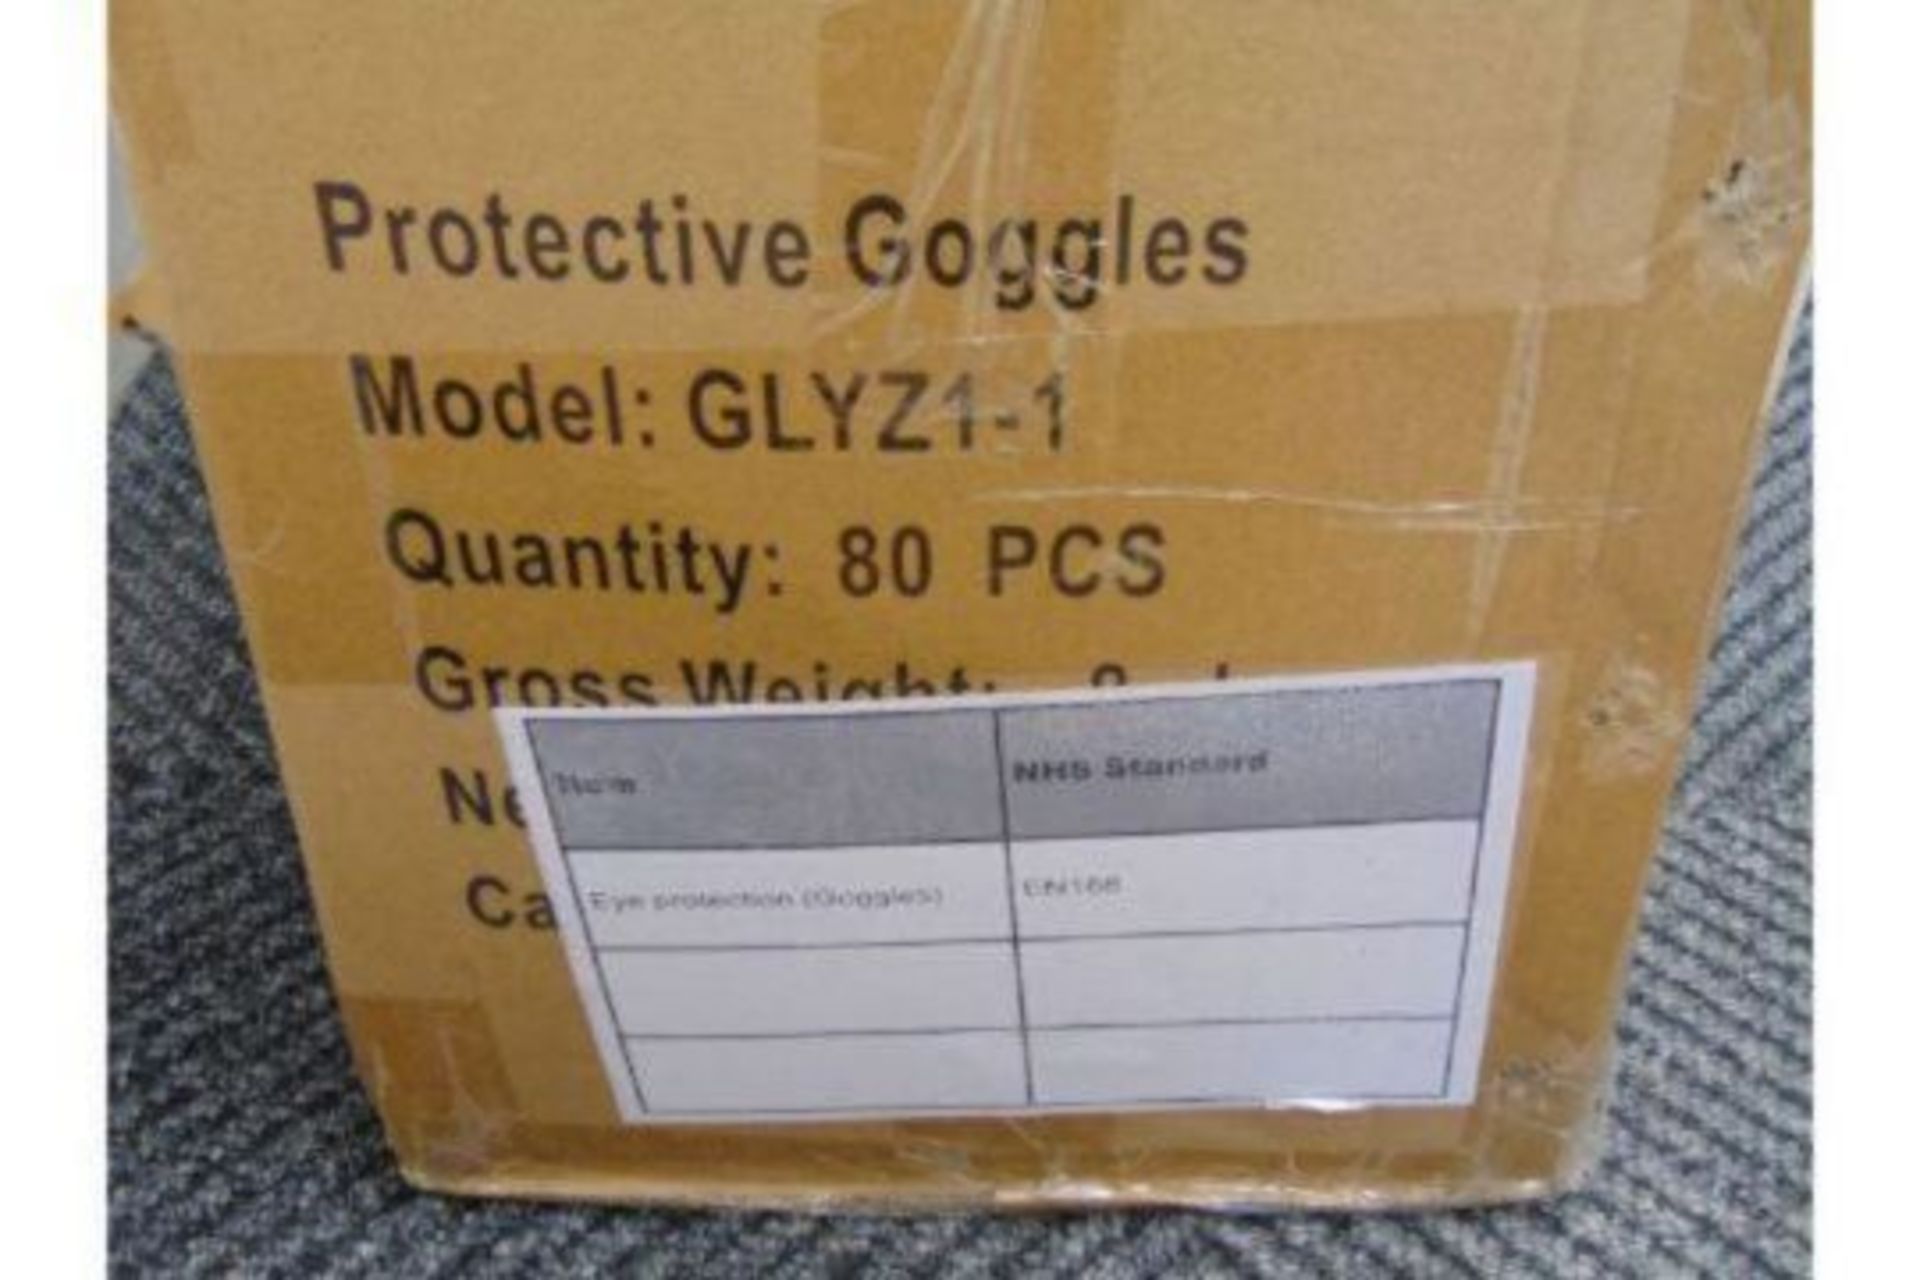 1440 Protective Goggles GLYZ1-1, 1 Pallet (18 Boxes, 80 per box) New Unissued Reserve Stock - Image 15 of 15